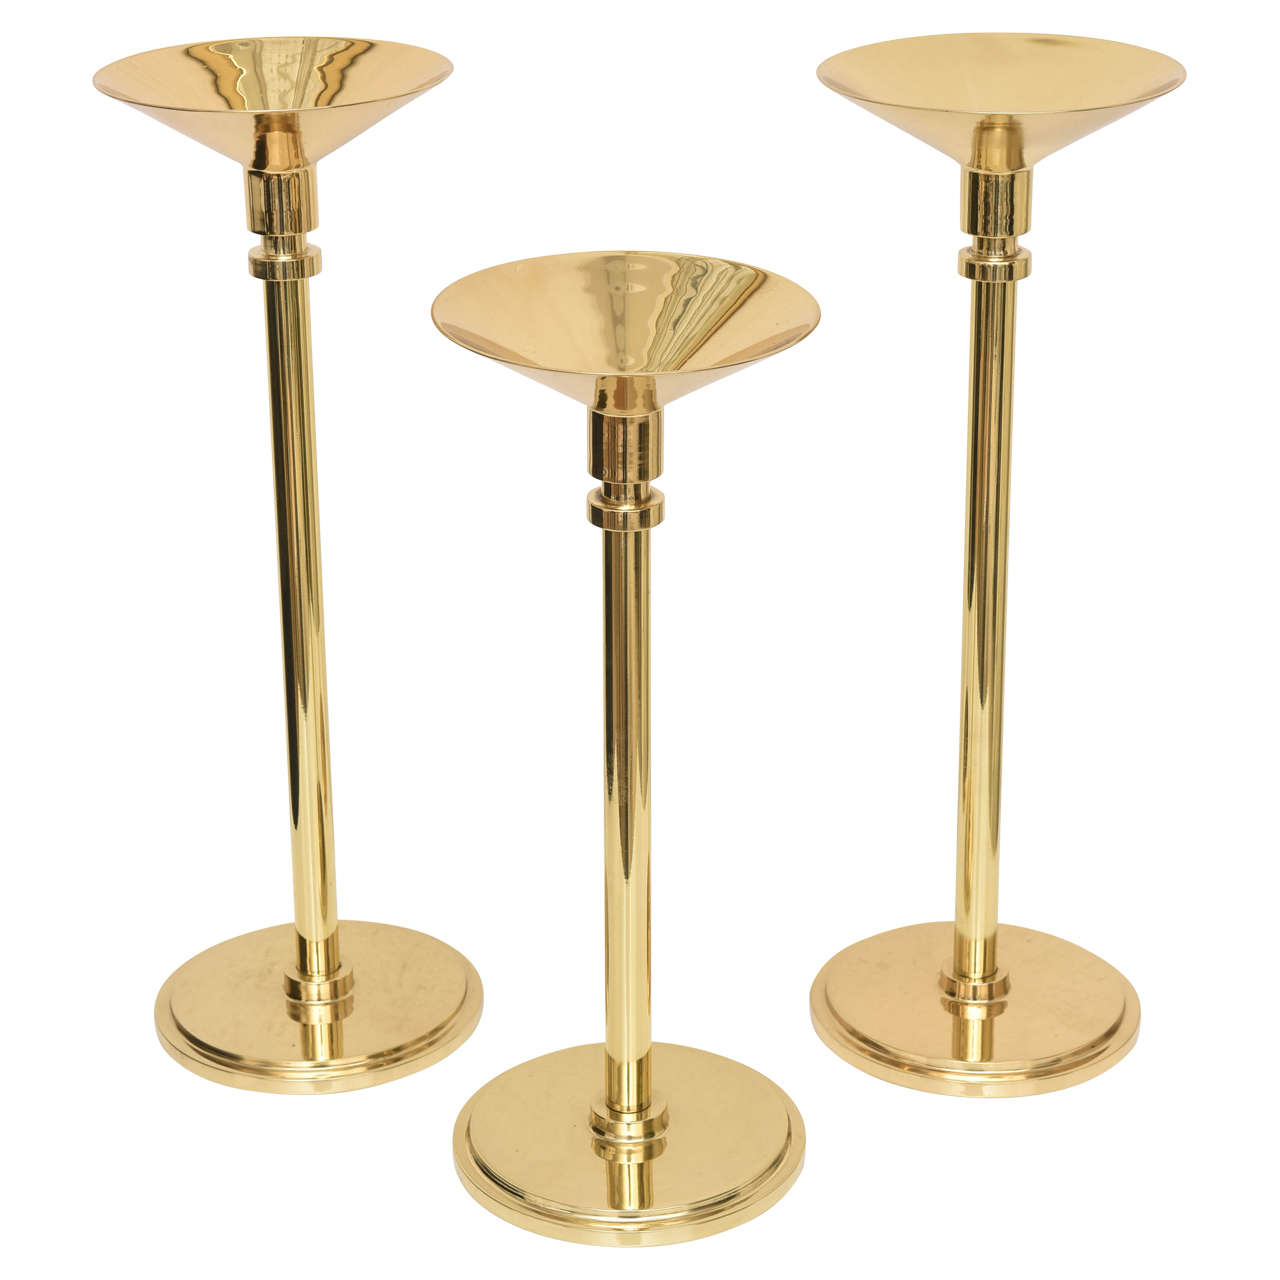 Set of Three Art Deco Style, Graduated-Height, Polished Brass Candlesticks